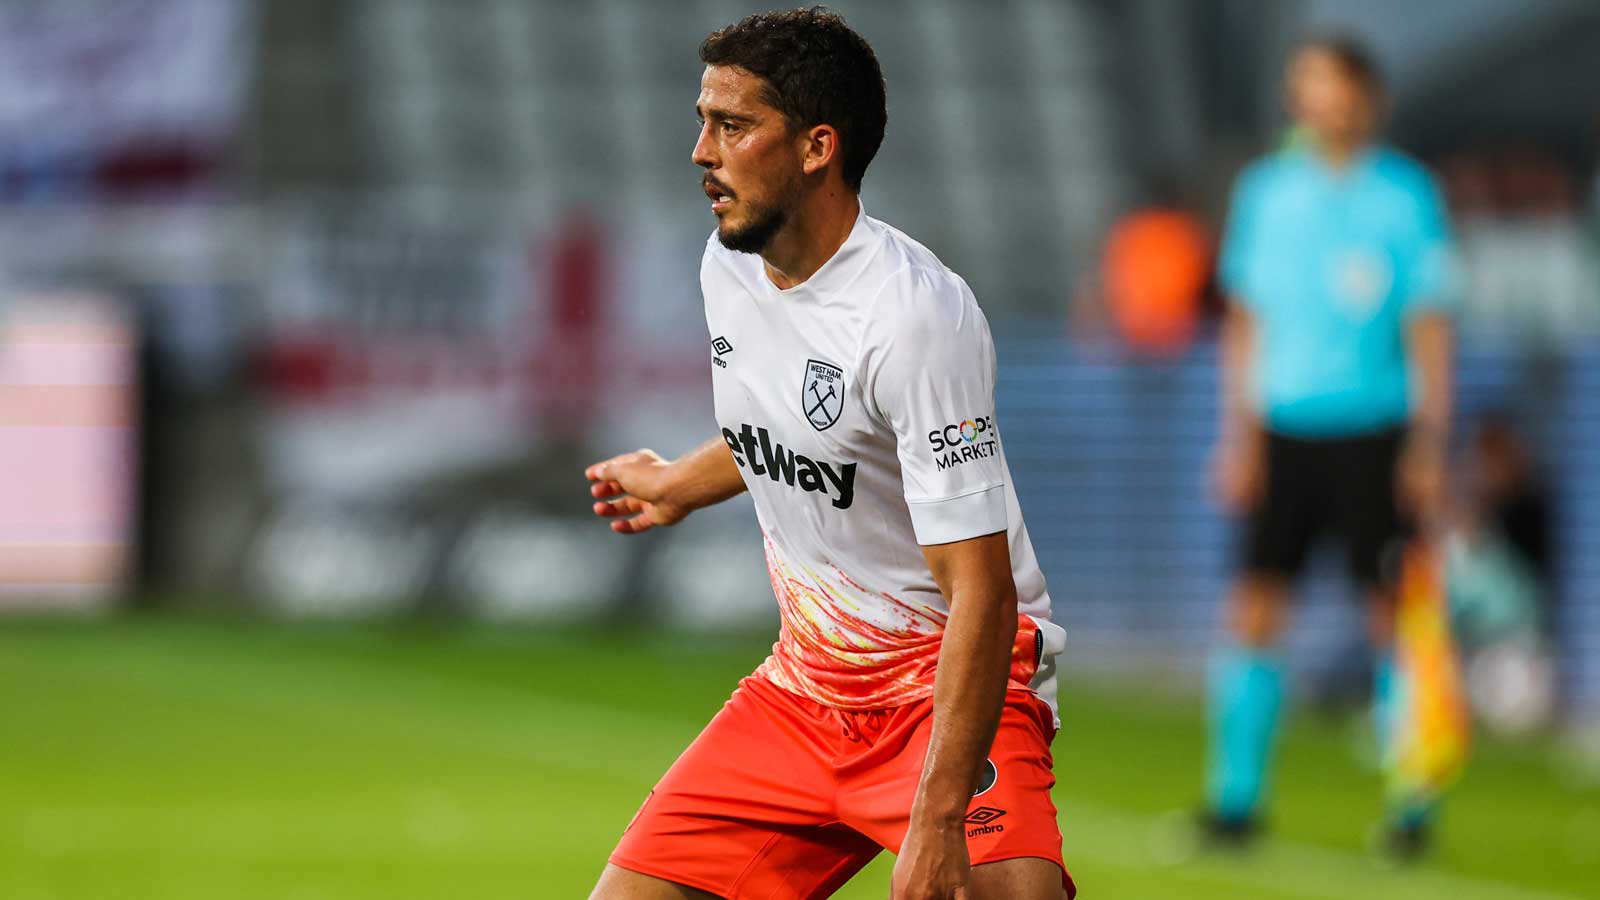 Pablo Fornals in action against Viborg